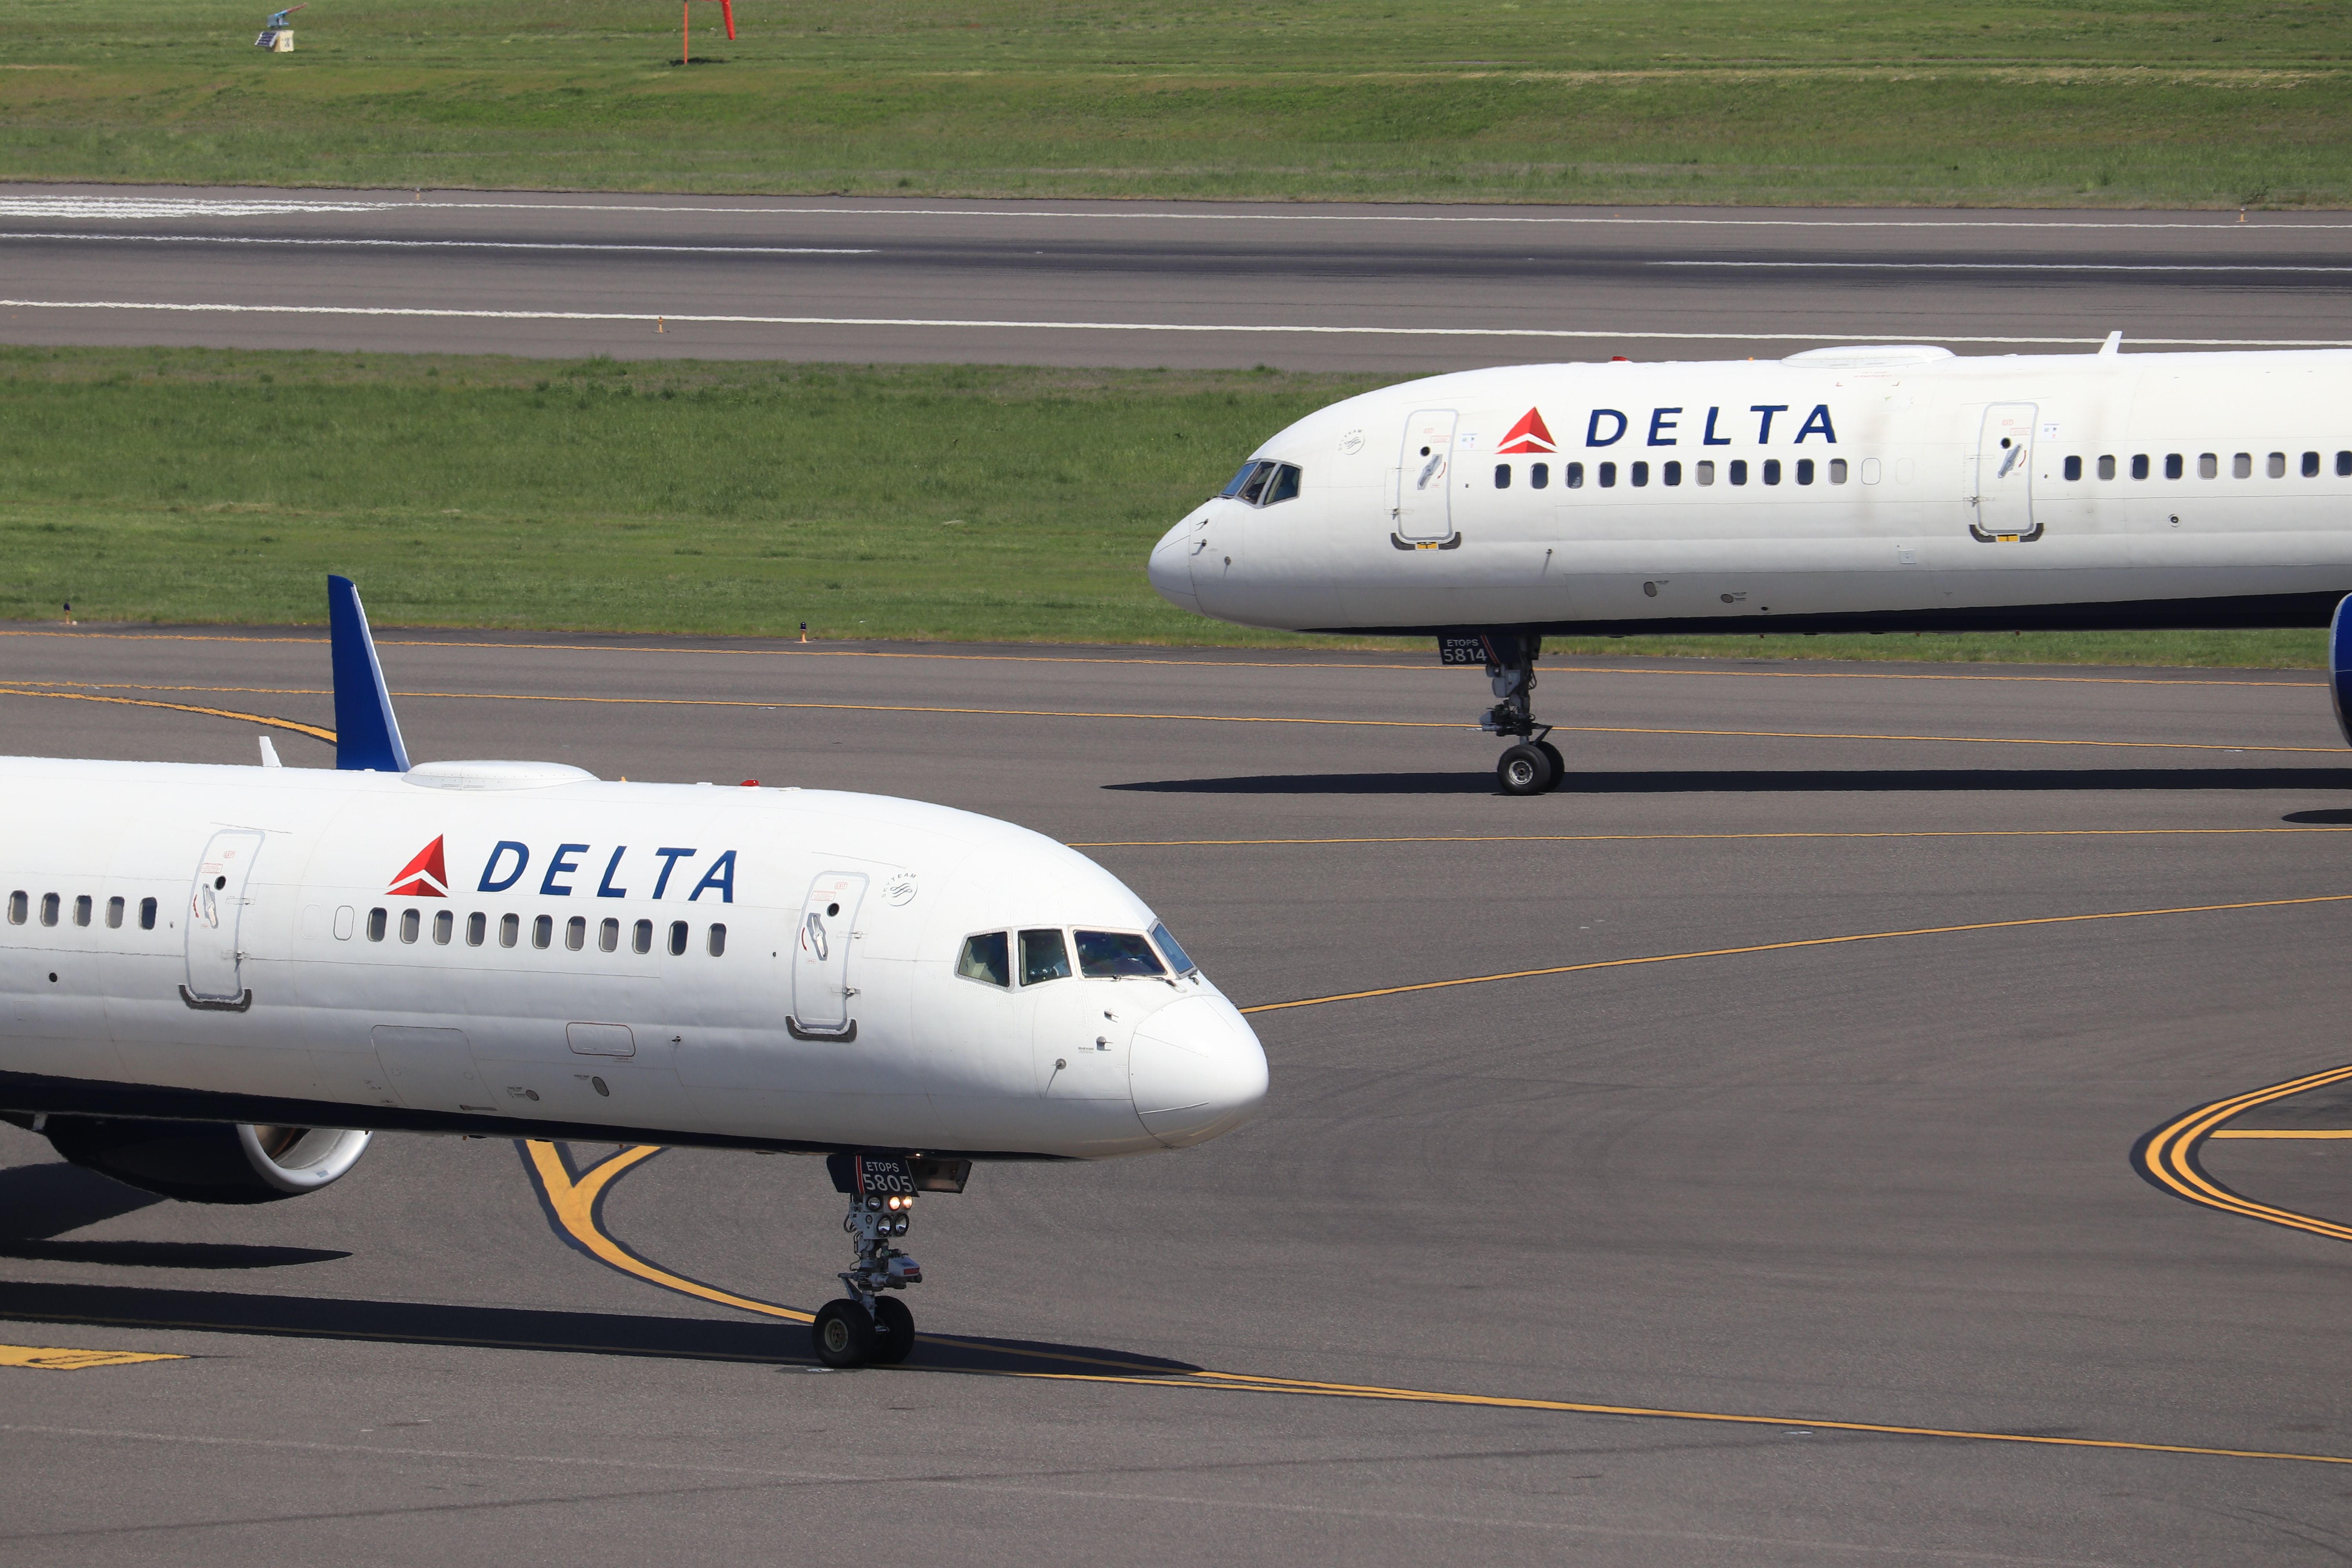 Delta Air Lines Boeing 757s at Portland International Airport.